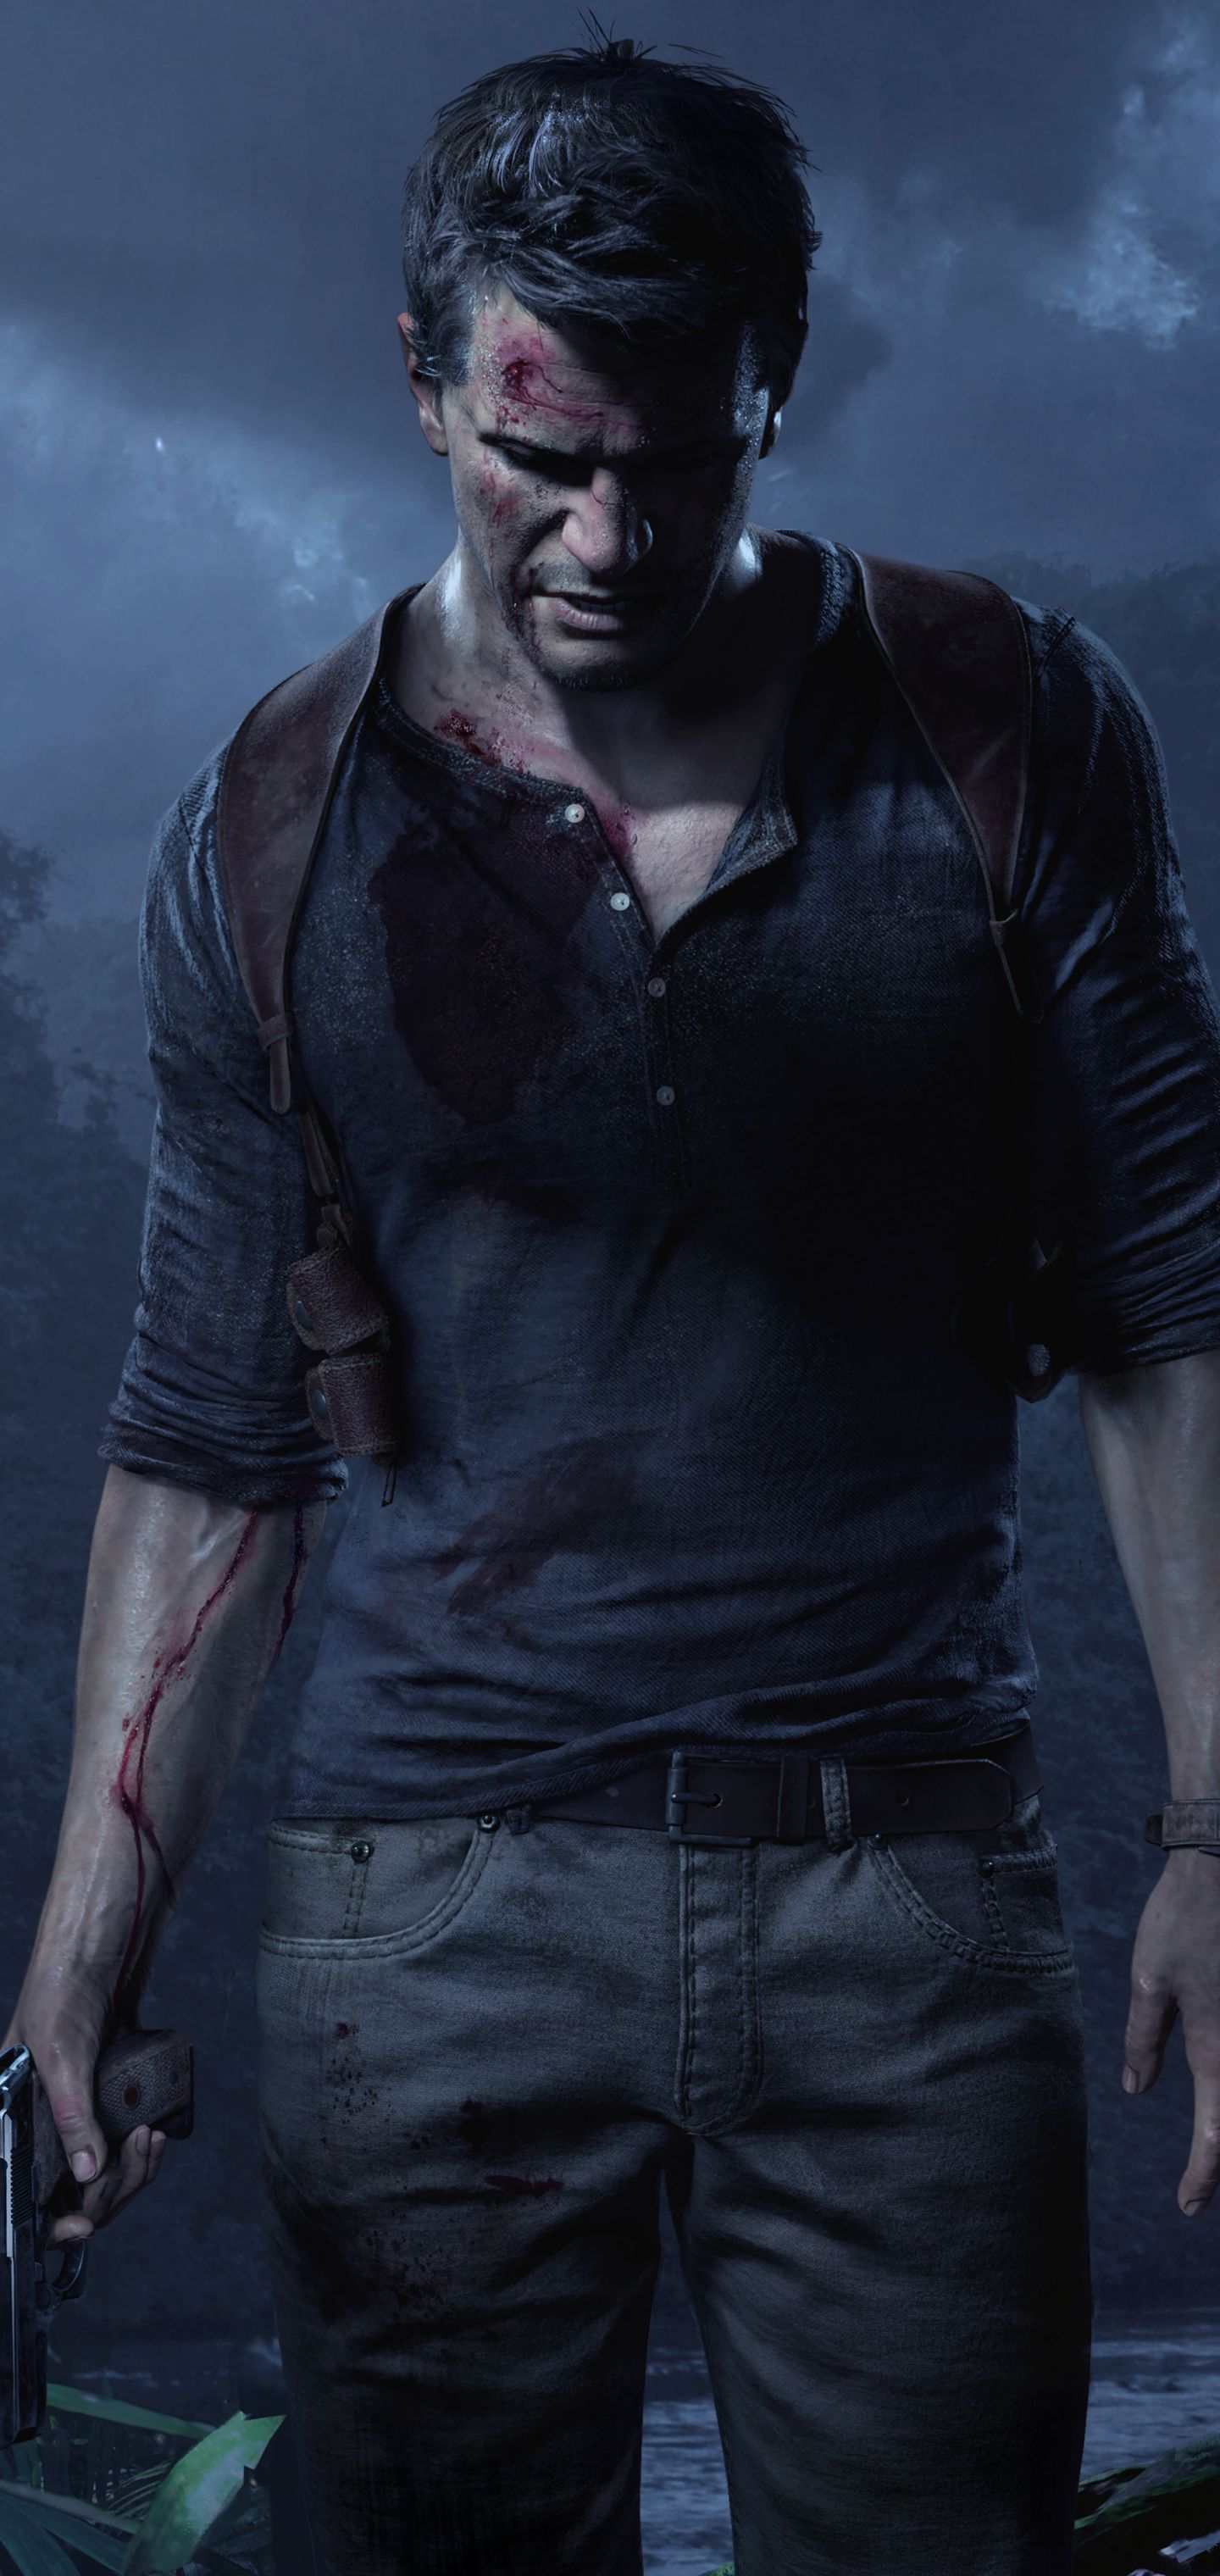 Mobile wallpaper: Uncharted, Video Game, Nathan Drake, Uncharted 4: A  Thief's End, 1189981 download the picture for free.